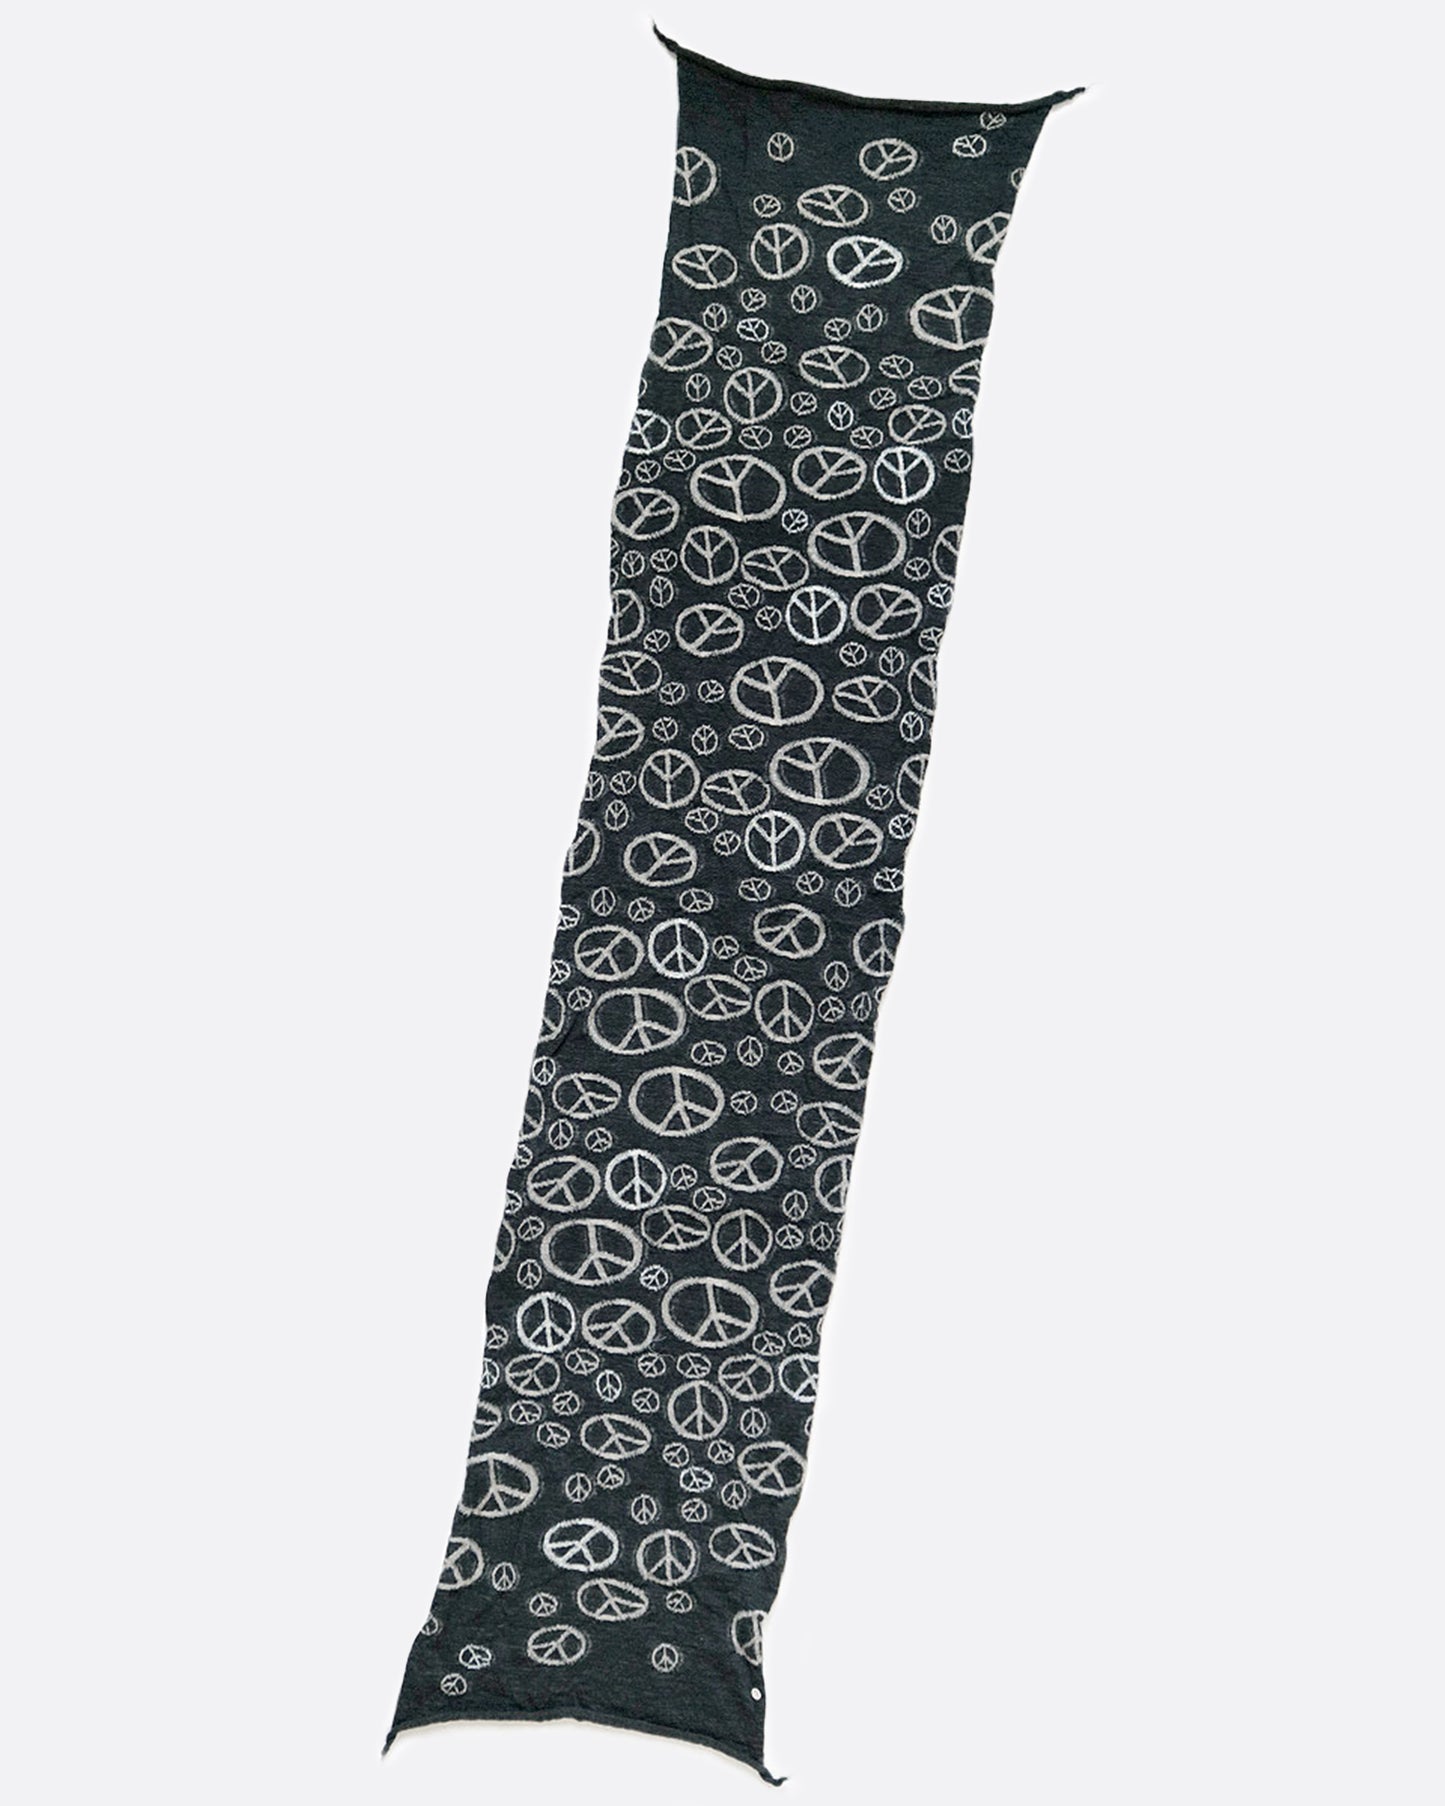 A black wool scarf with white peace signs, shown laying flat.